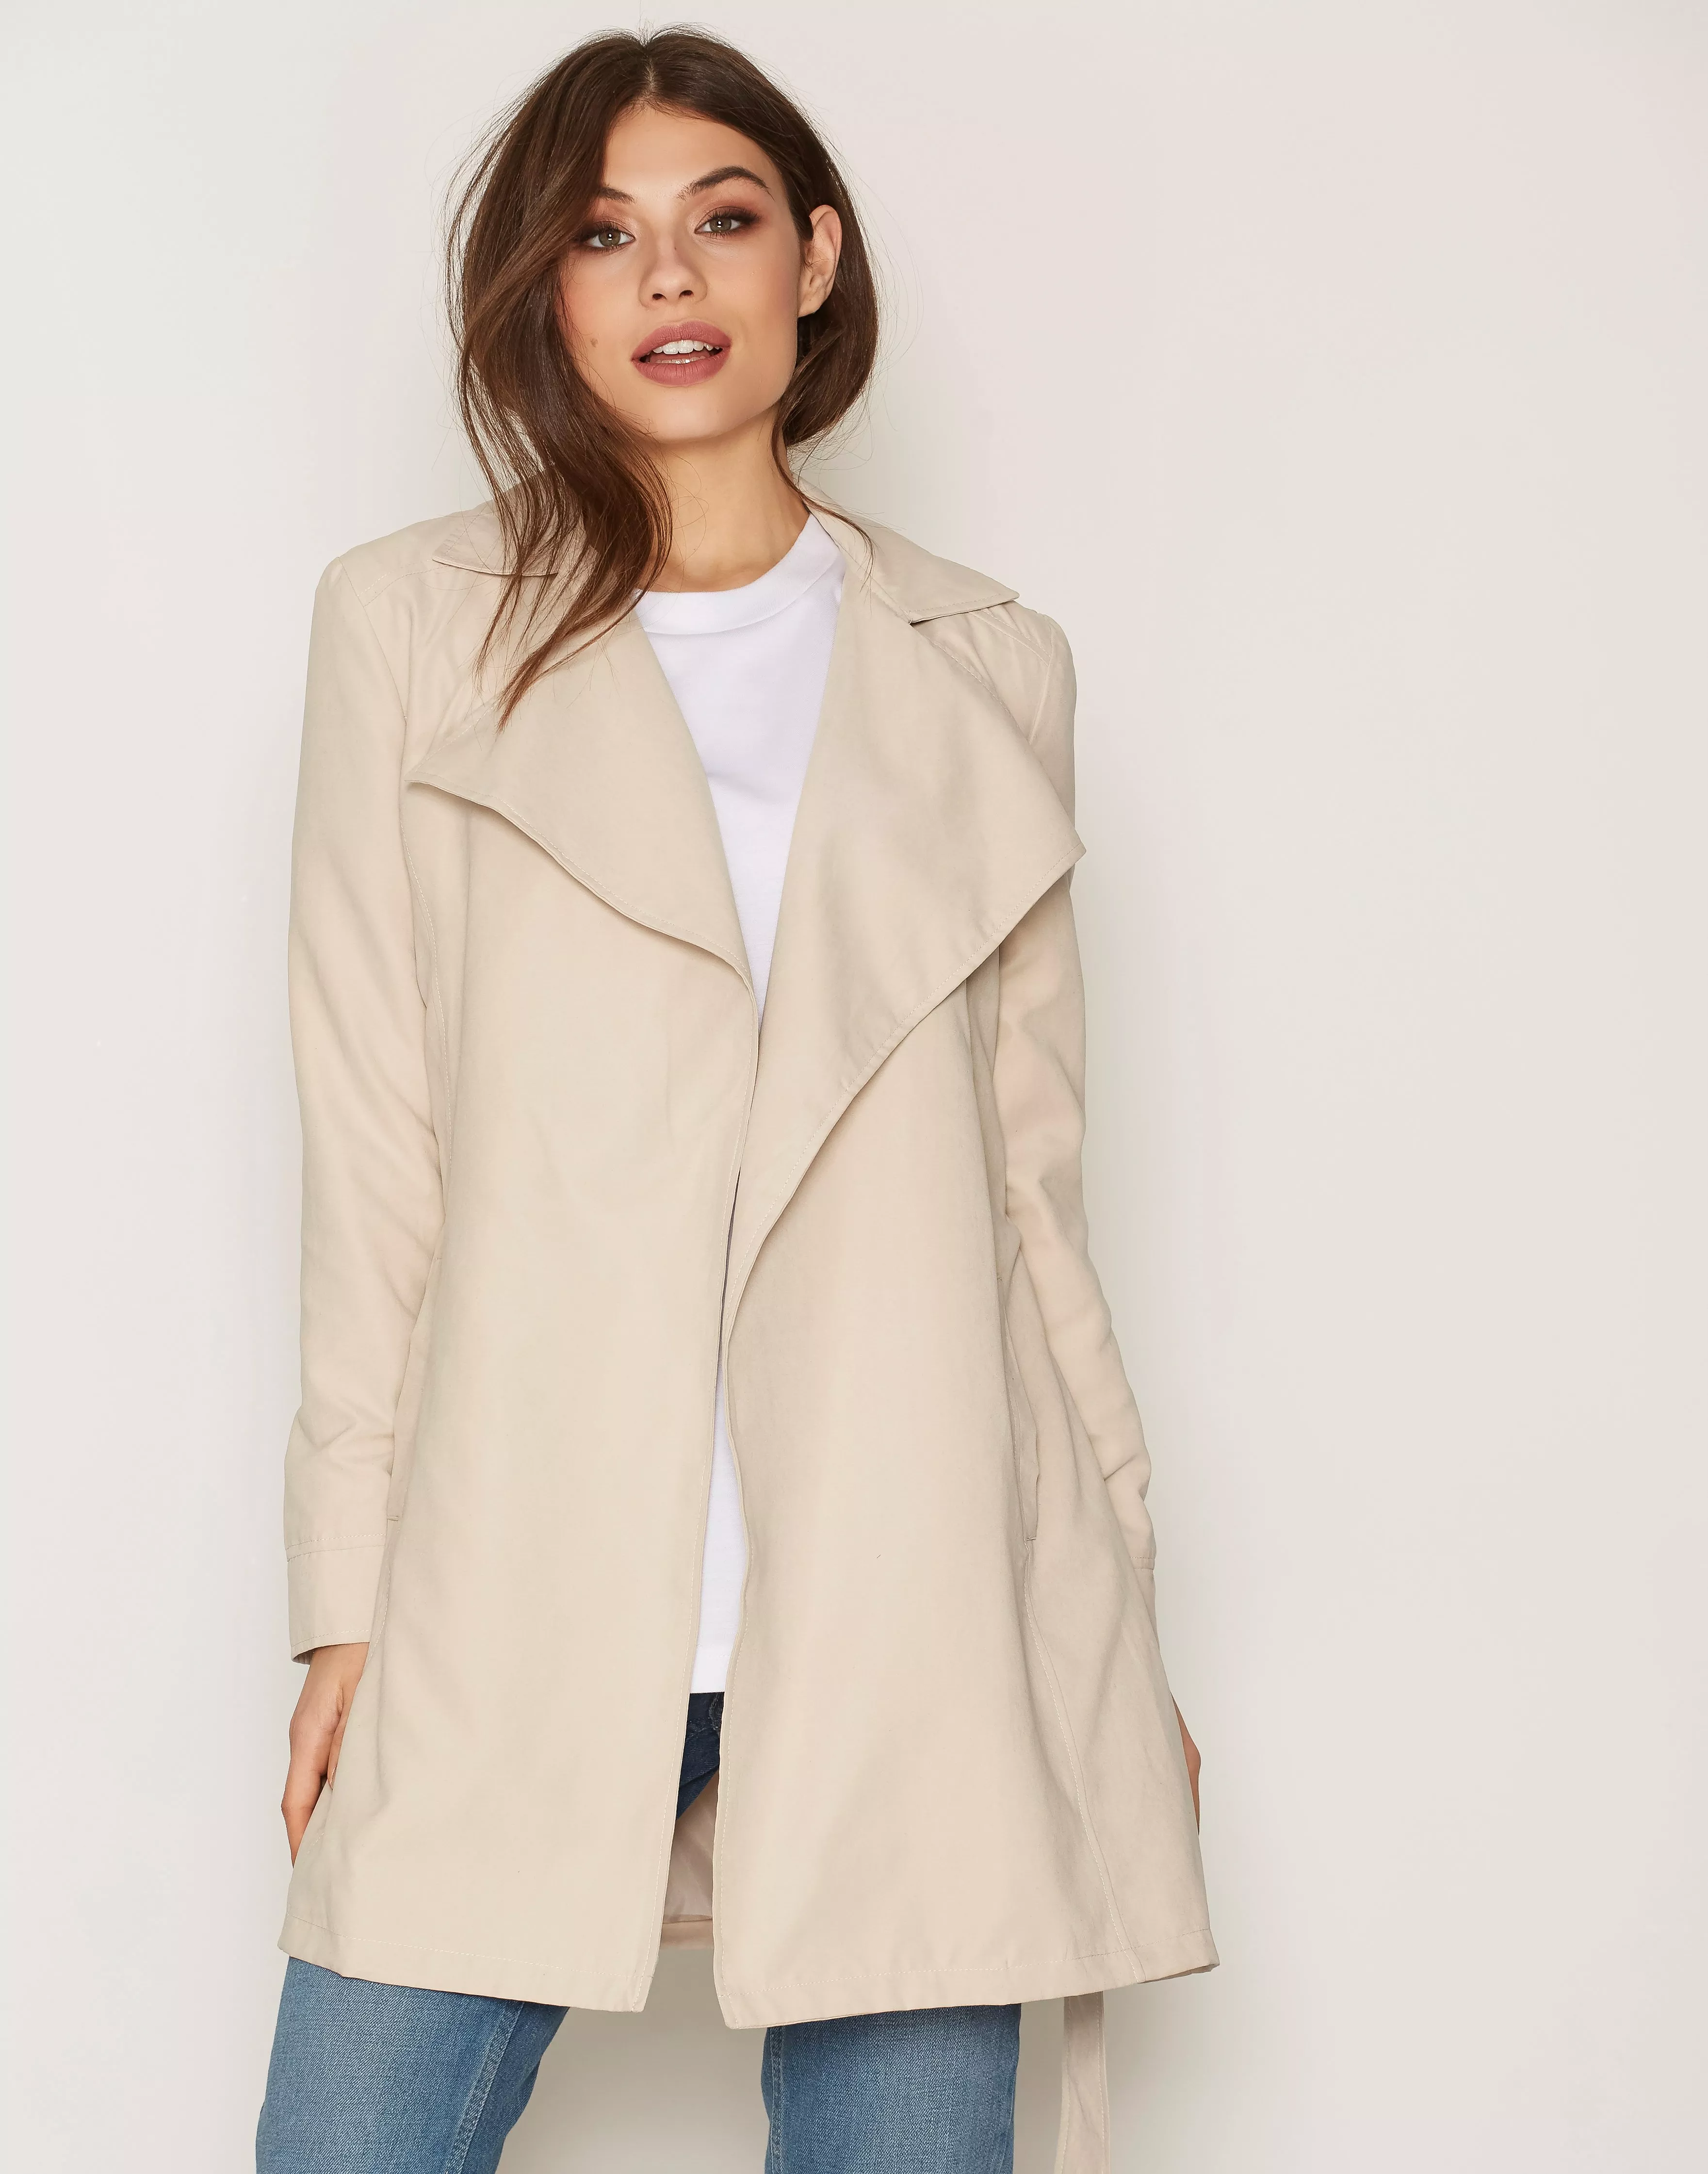 Buy Nelly Soft Spring Trench Coat - Beige